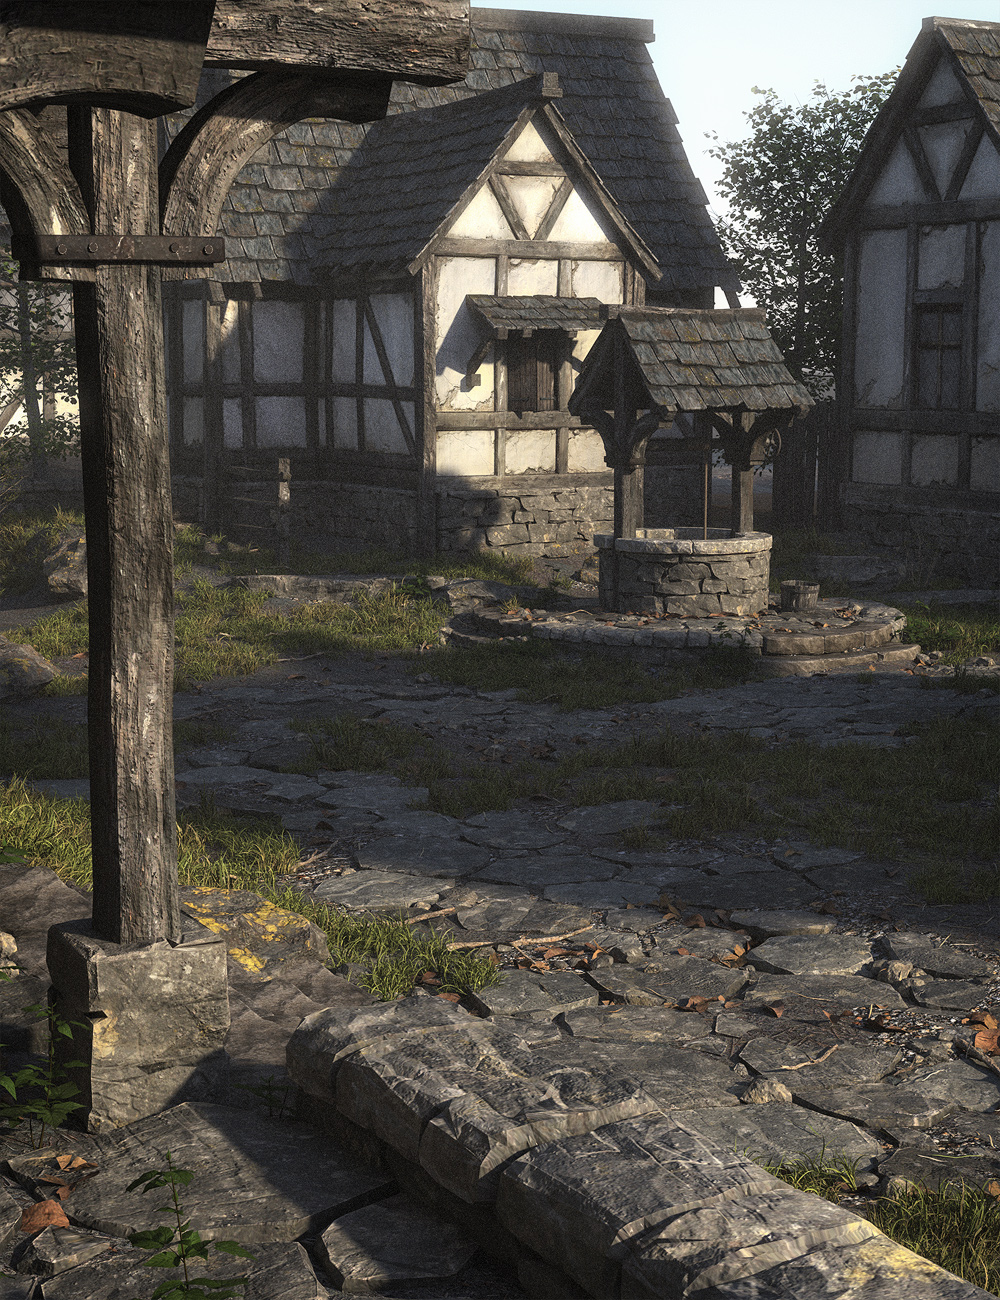 The Streets of the Medieval by: Stonemason, 3D Models by Daz 3D